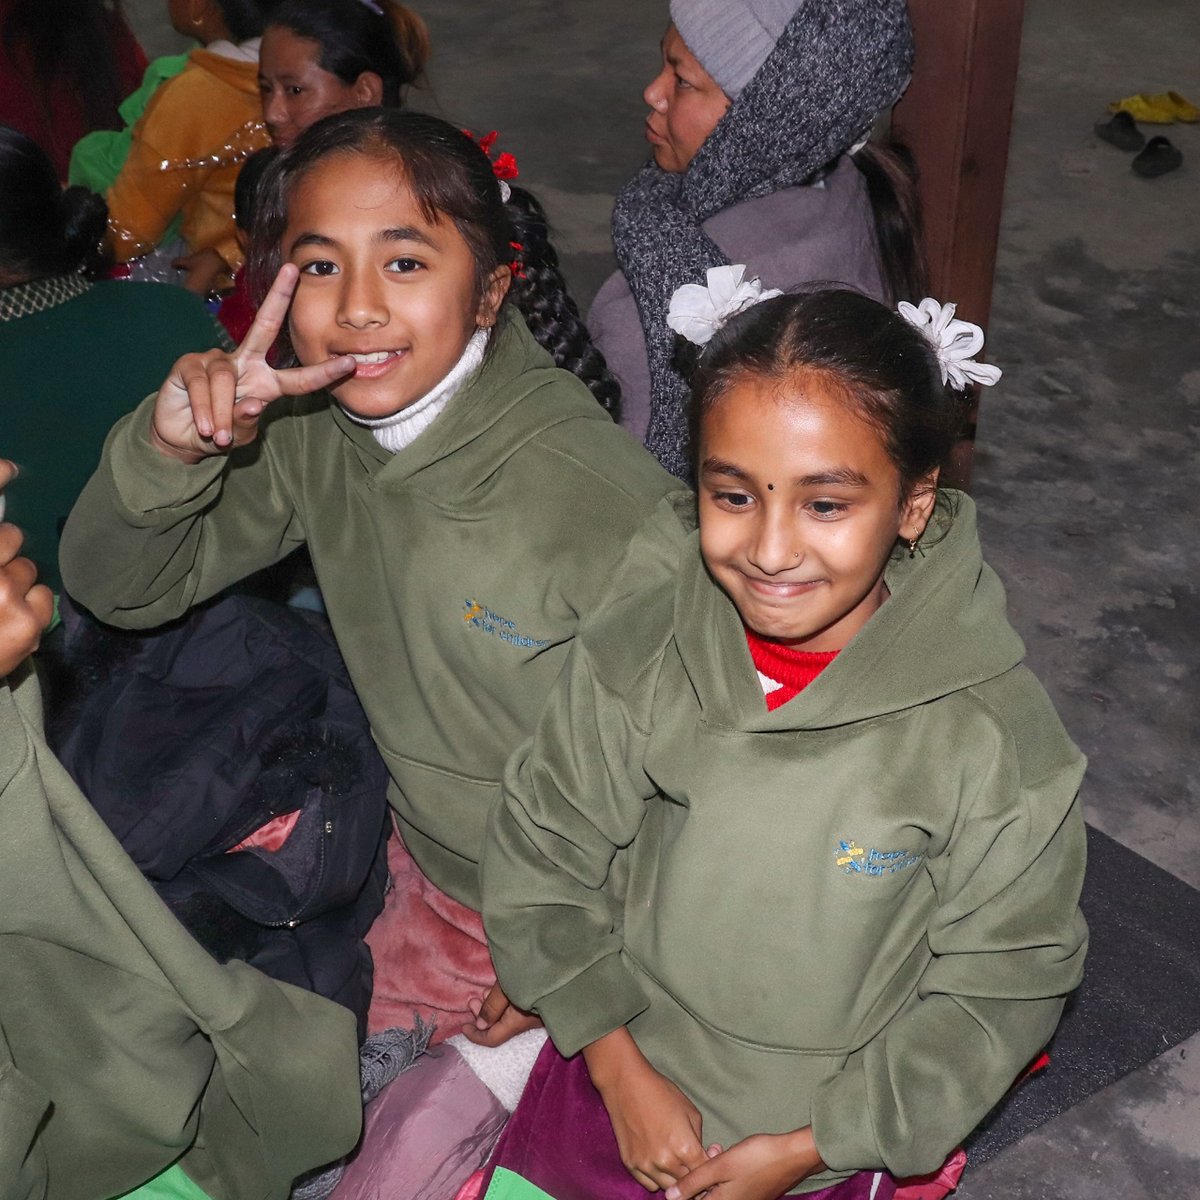 Last December, our child sponsorship program had the opportunity to distribute winter clothing to 81 children in the cold regions of Nepal!

Thank you for helping us make a difference 👏

#GFAWorld #winterclothes #childsponsorship